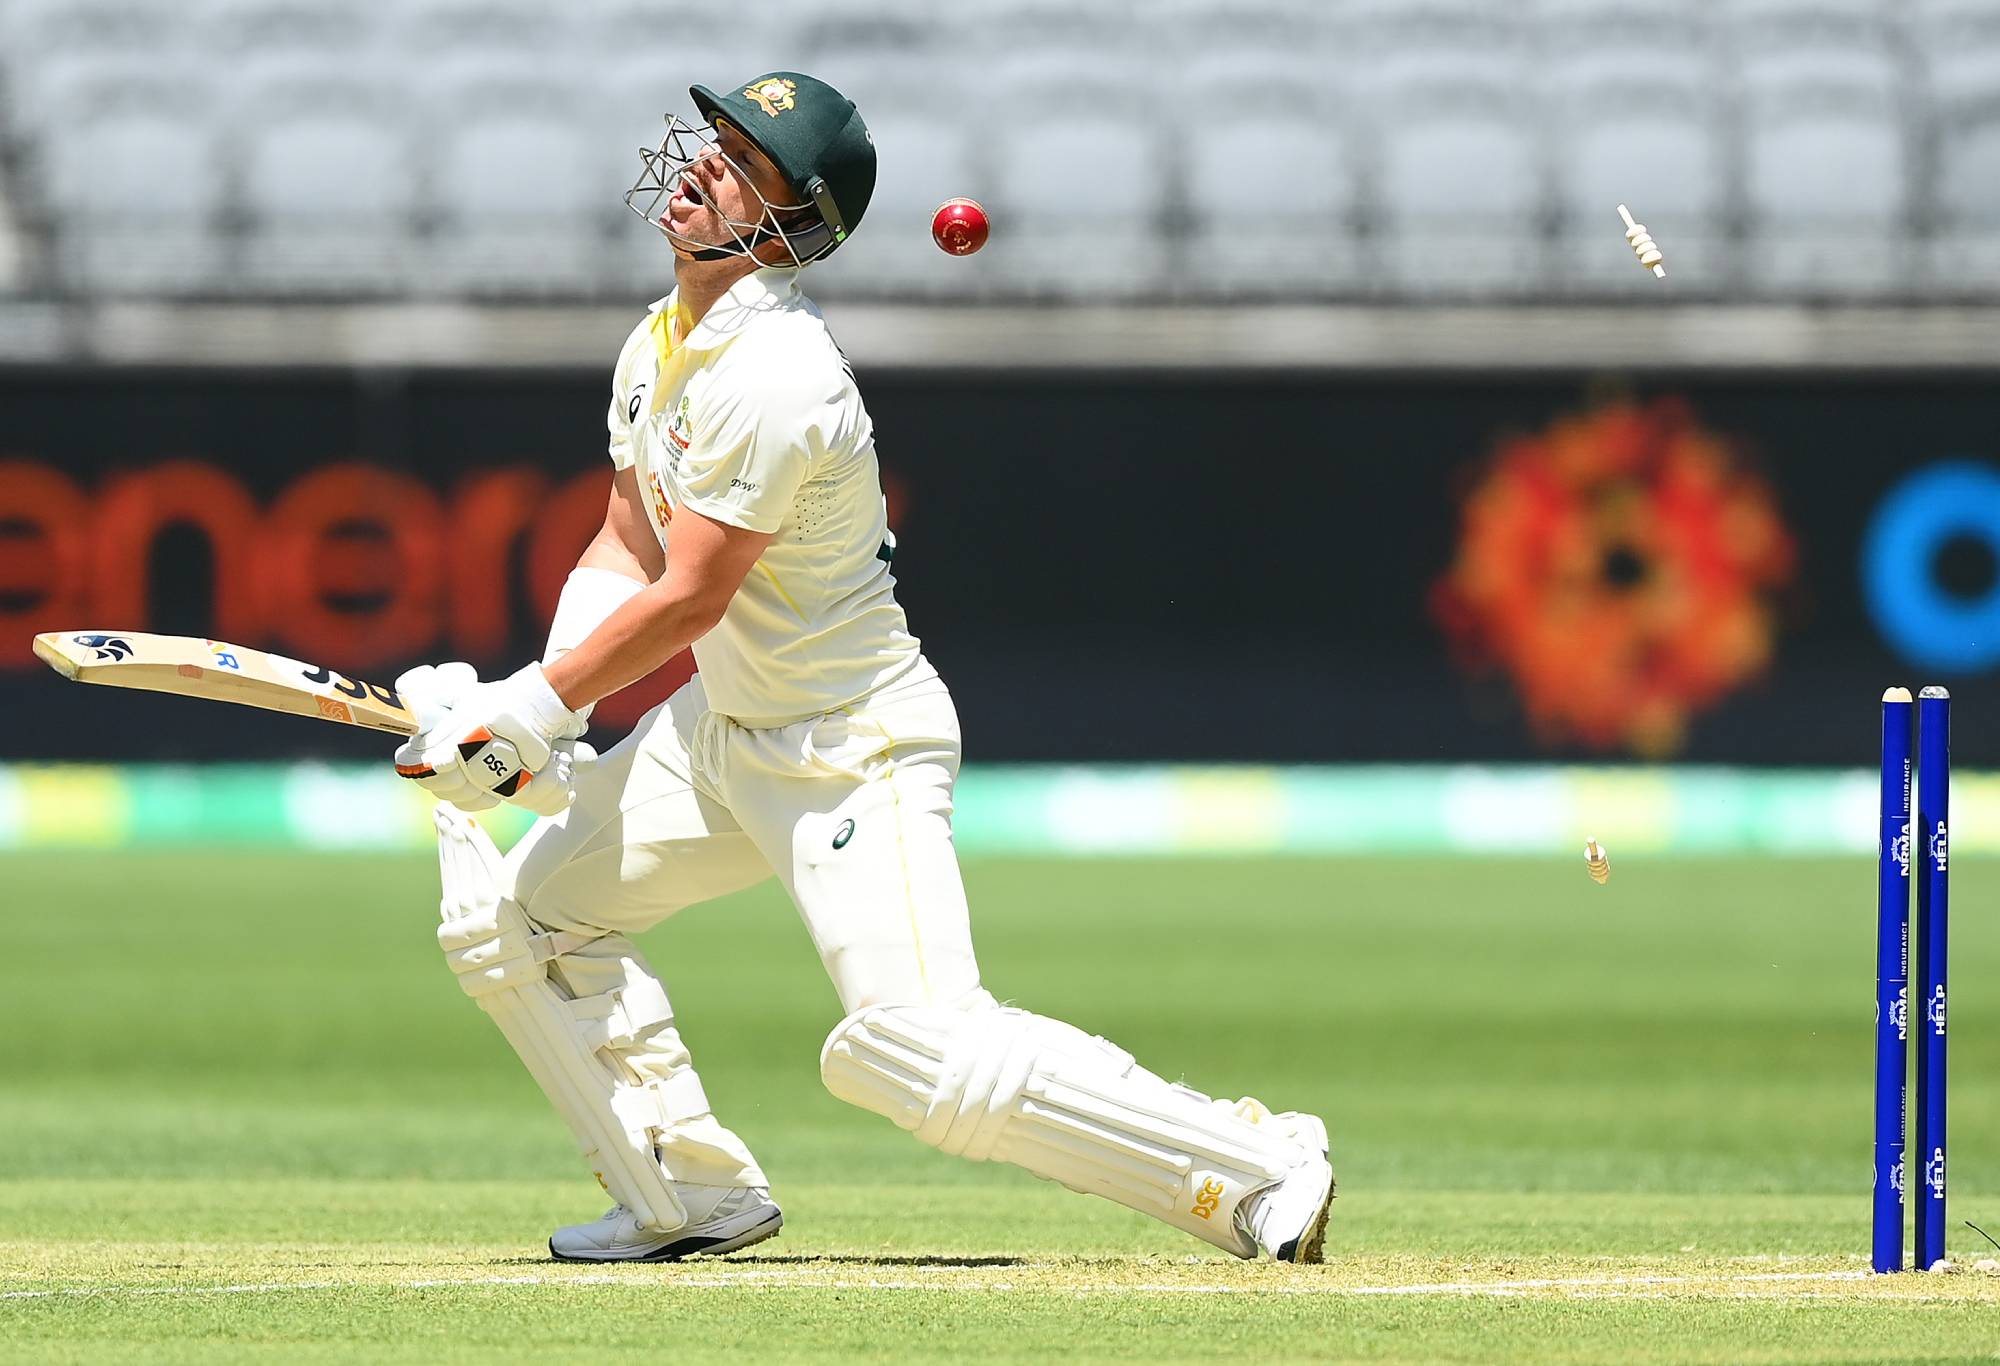 - NOVEMBER 30: David Warner of Australia reacts after being bowled by Jayden Seales of the West Indies during day one of the First Test match between Australia and the West Indies at Optus Stadium on November 30, 2022 in Perth, Australia. (Photo by Quinn Rooney - CA/Cricket Australia via Getty Images)